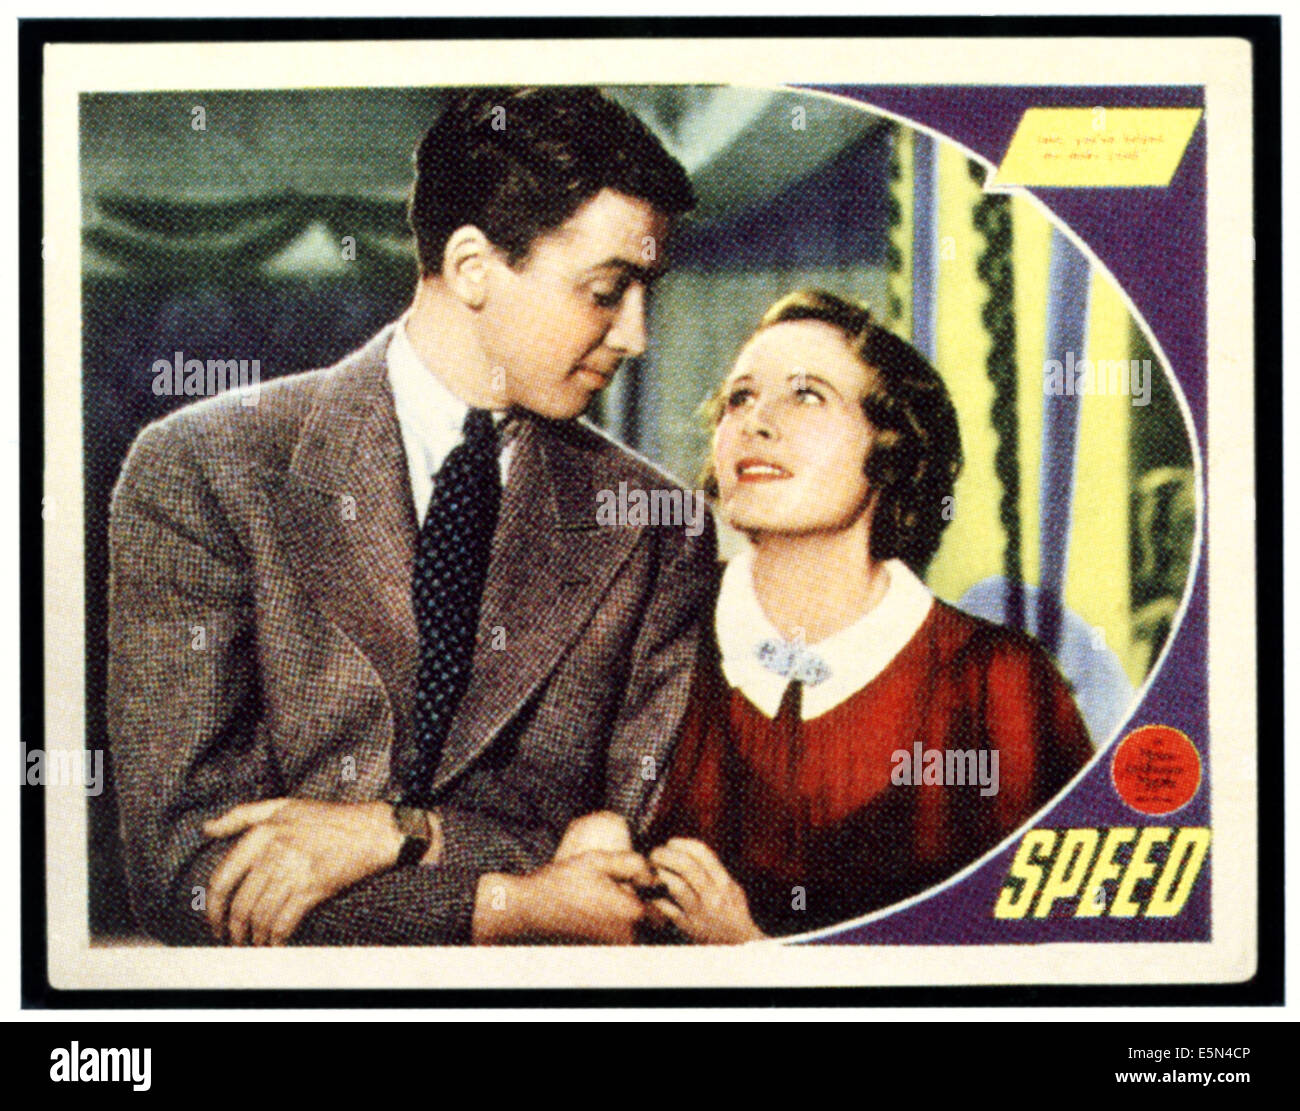 SPEED, from left: James Stewart, Wendy Barrie on lobbycard, 1936 Stock ...